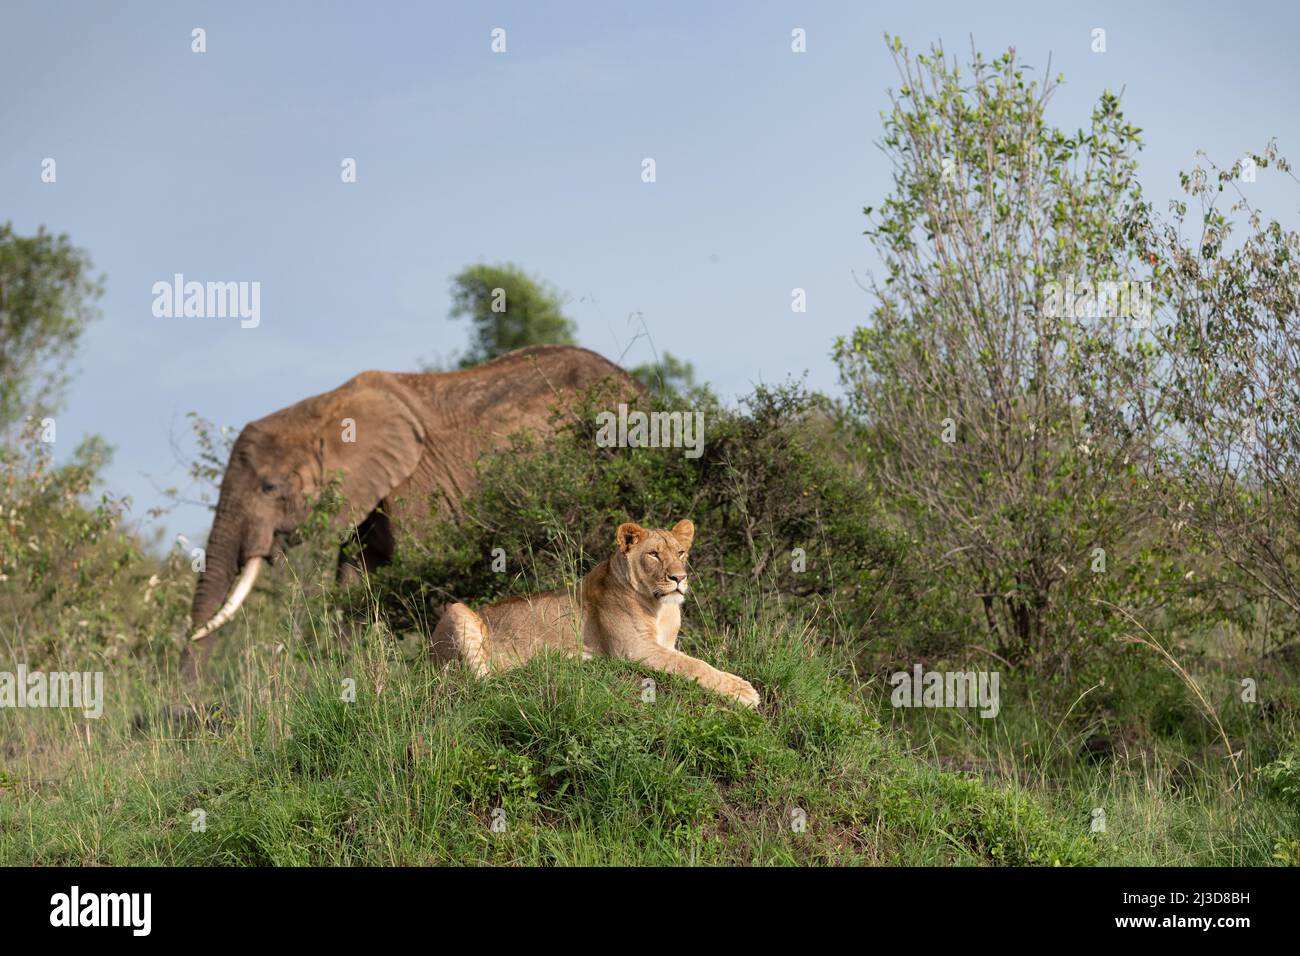 Lioness sitting up with elephant in the background Stock Photo